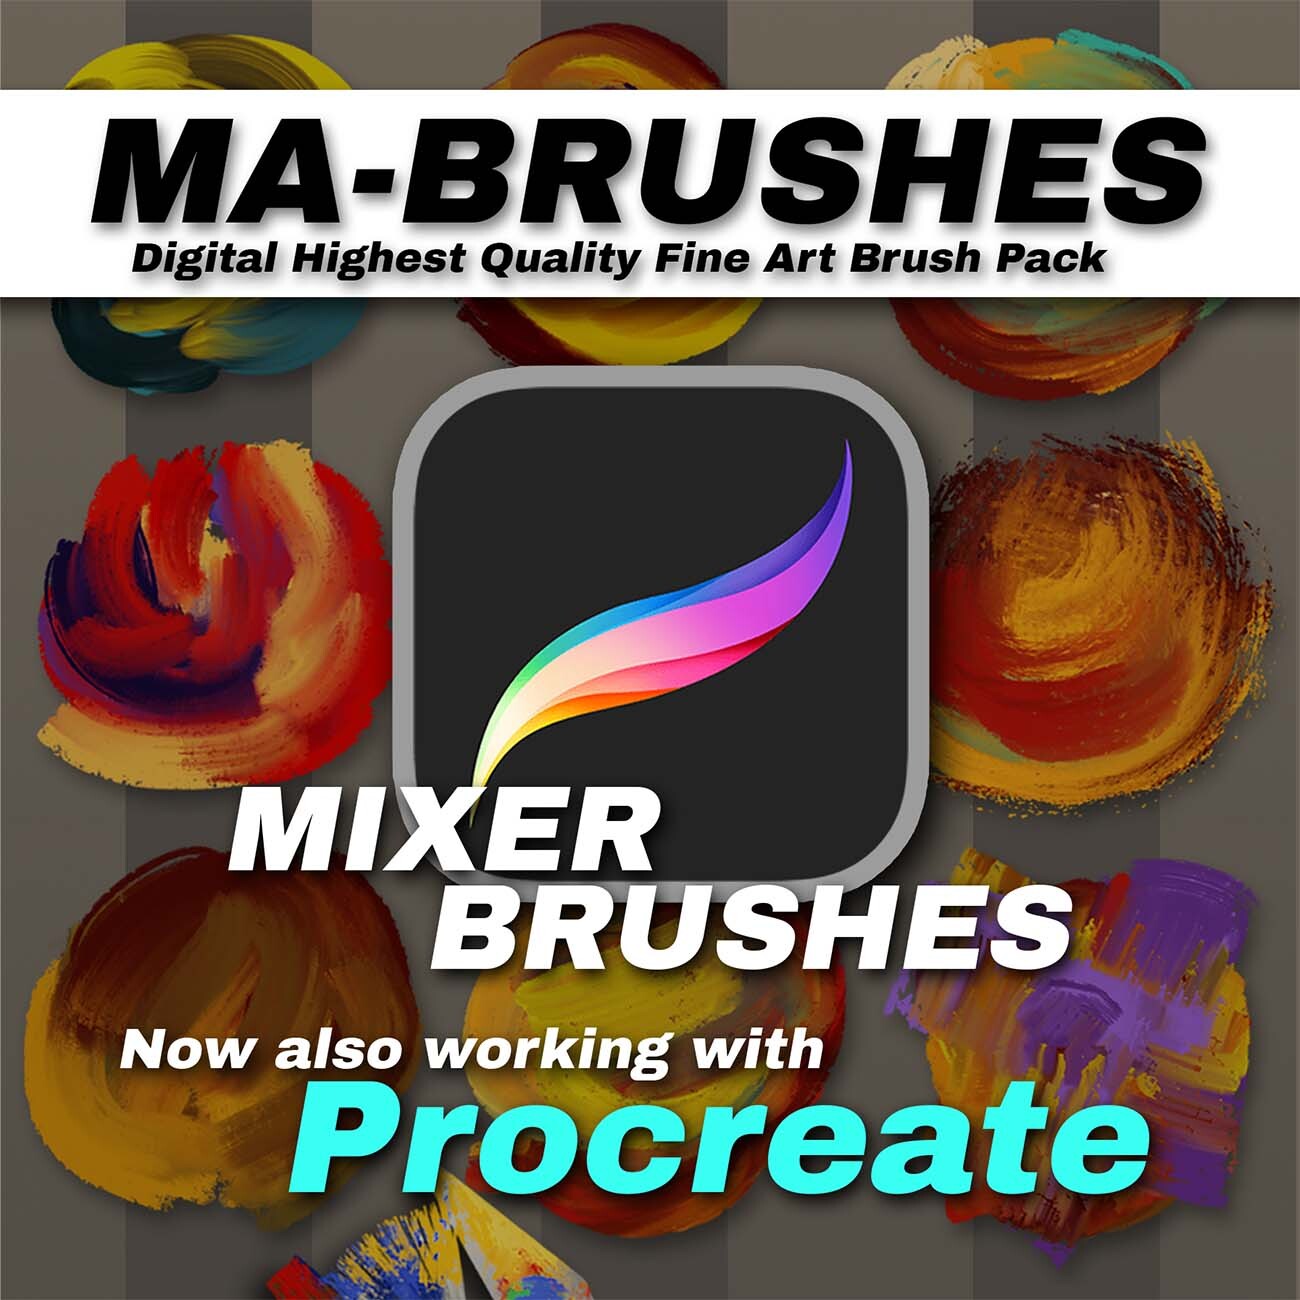 MA-Brushes Update! Added Brushes for Procreate Users!